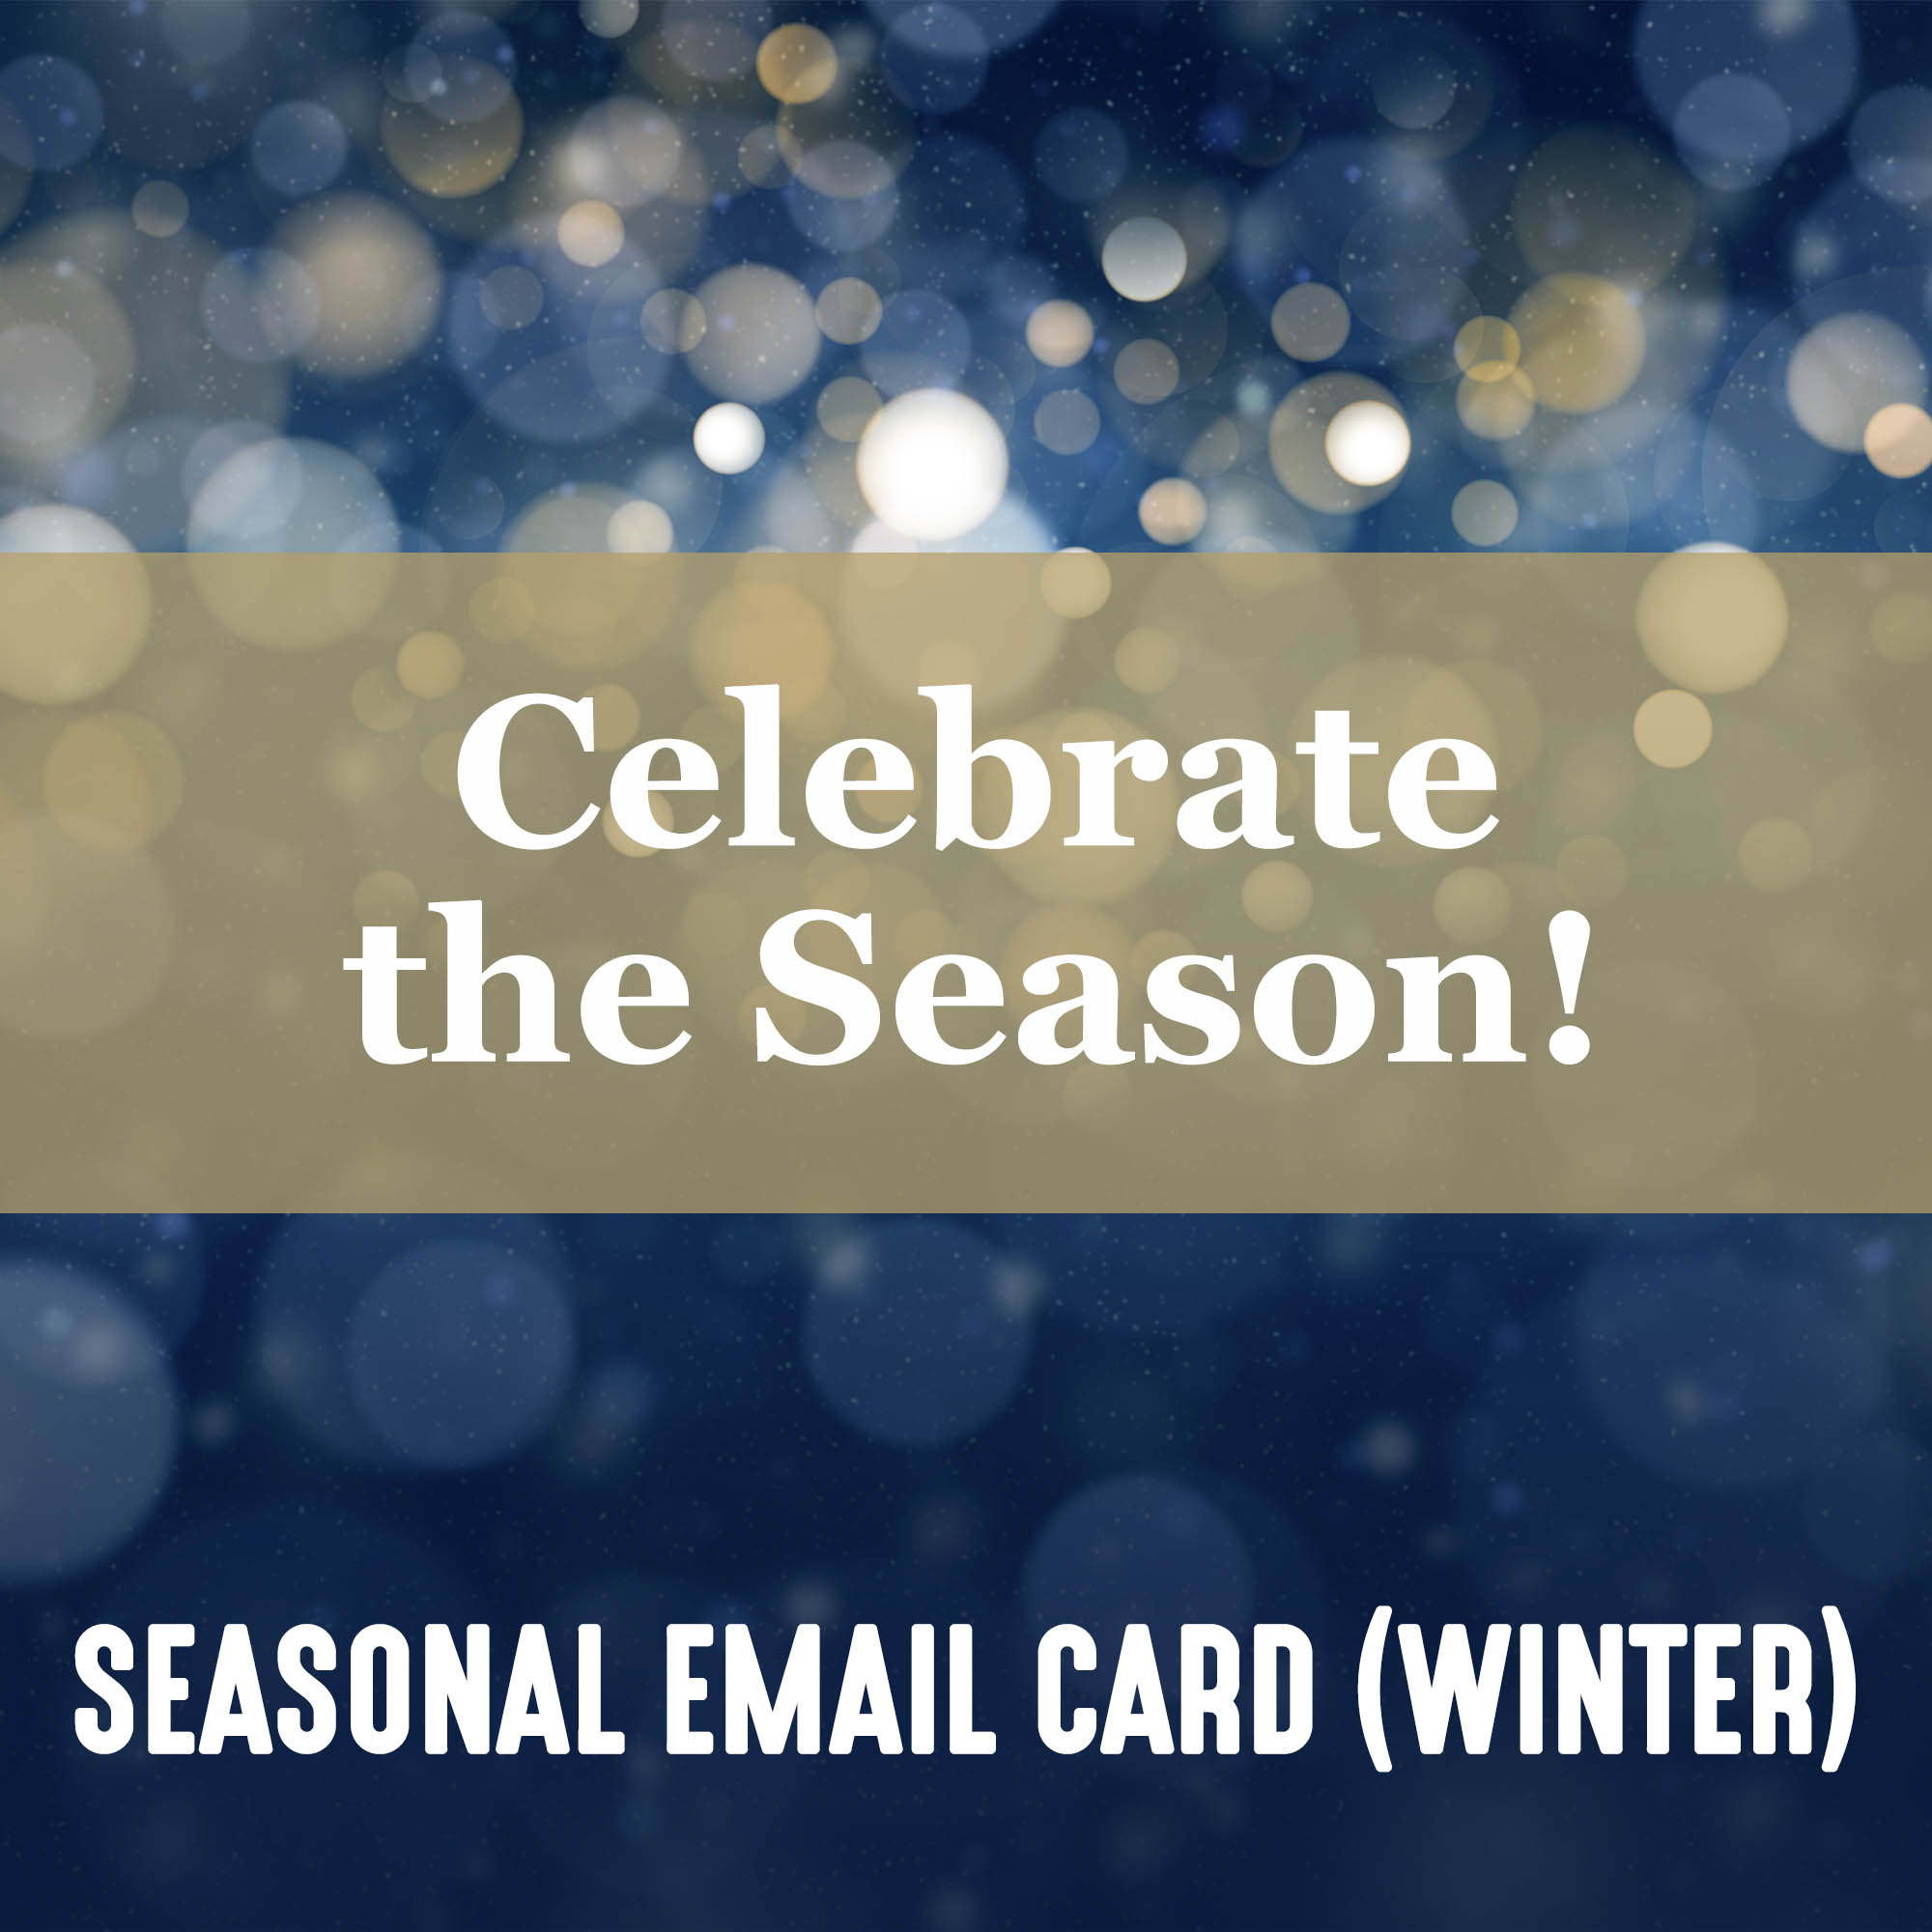 [NEW] Email Communication – Winter Seasonal Email Card 2022